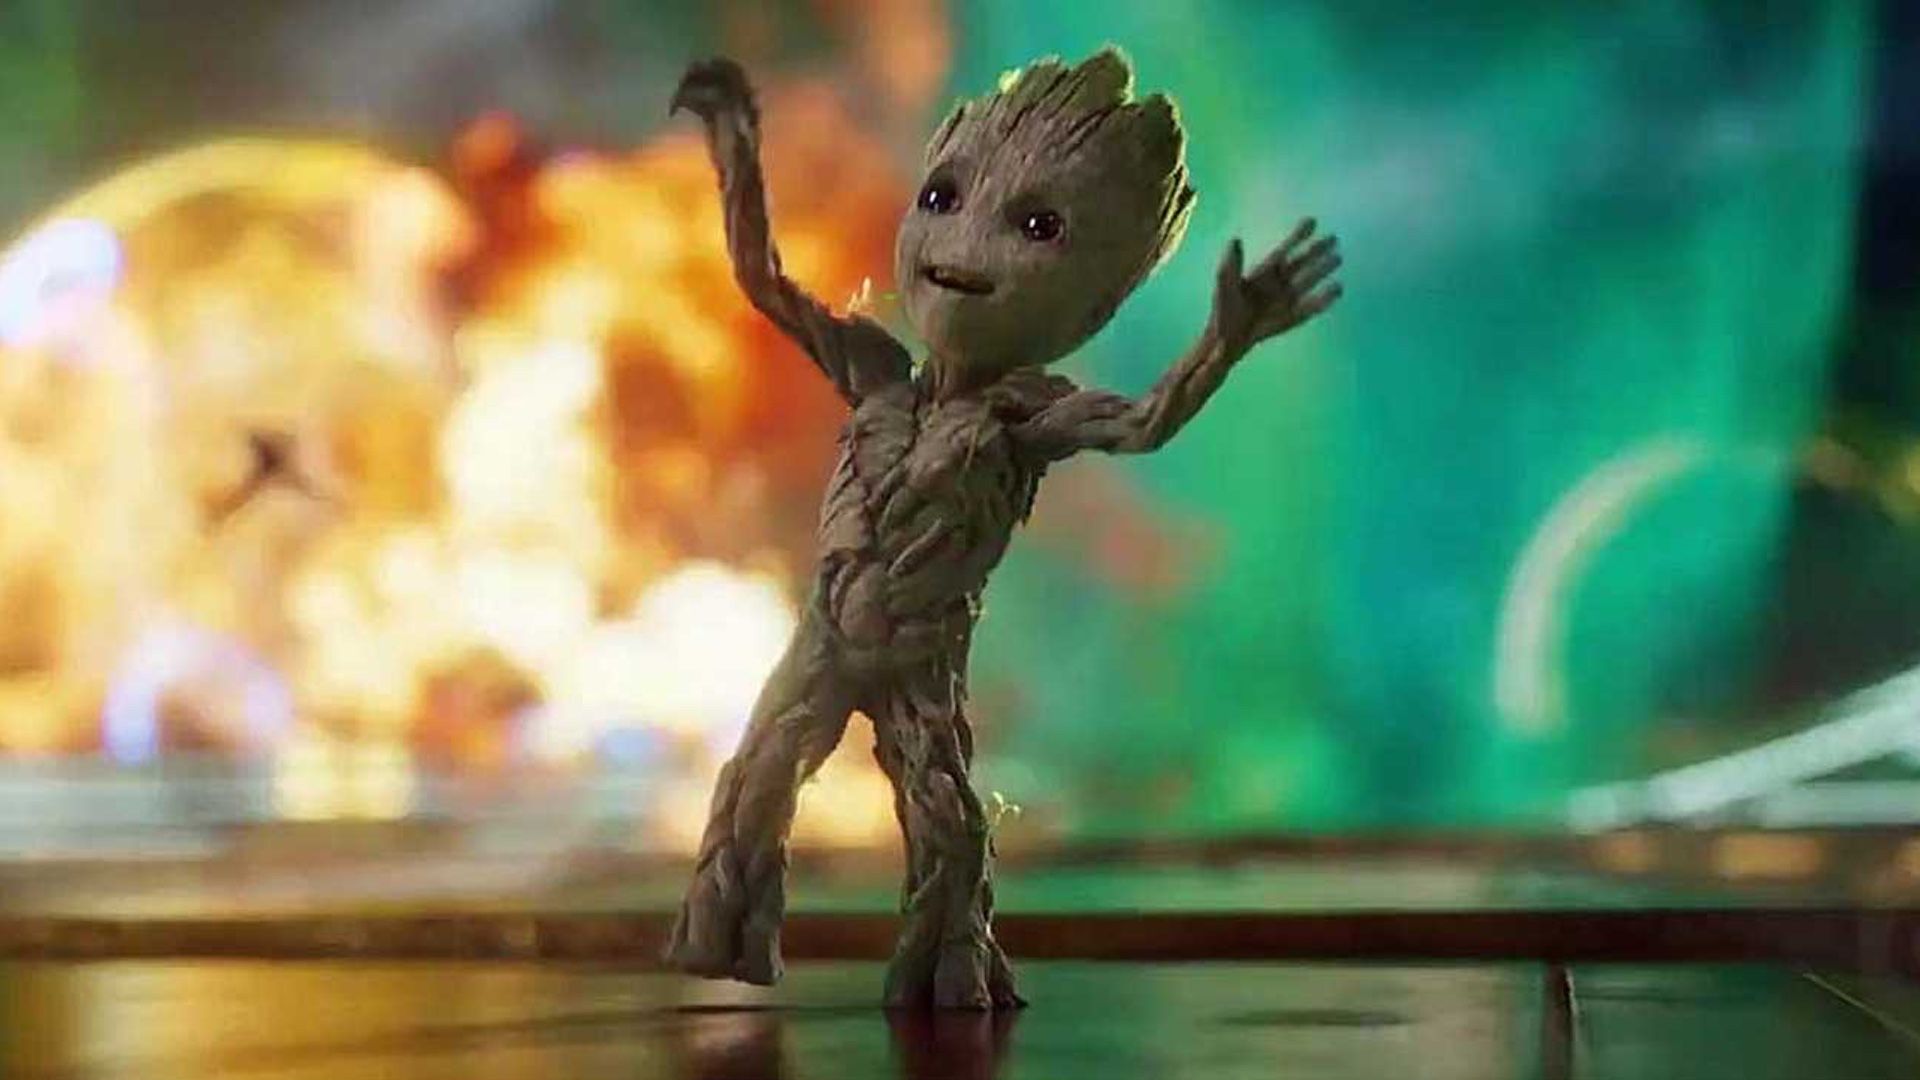 HD Wallpaper of Cutest Marvel Character Groot!